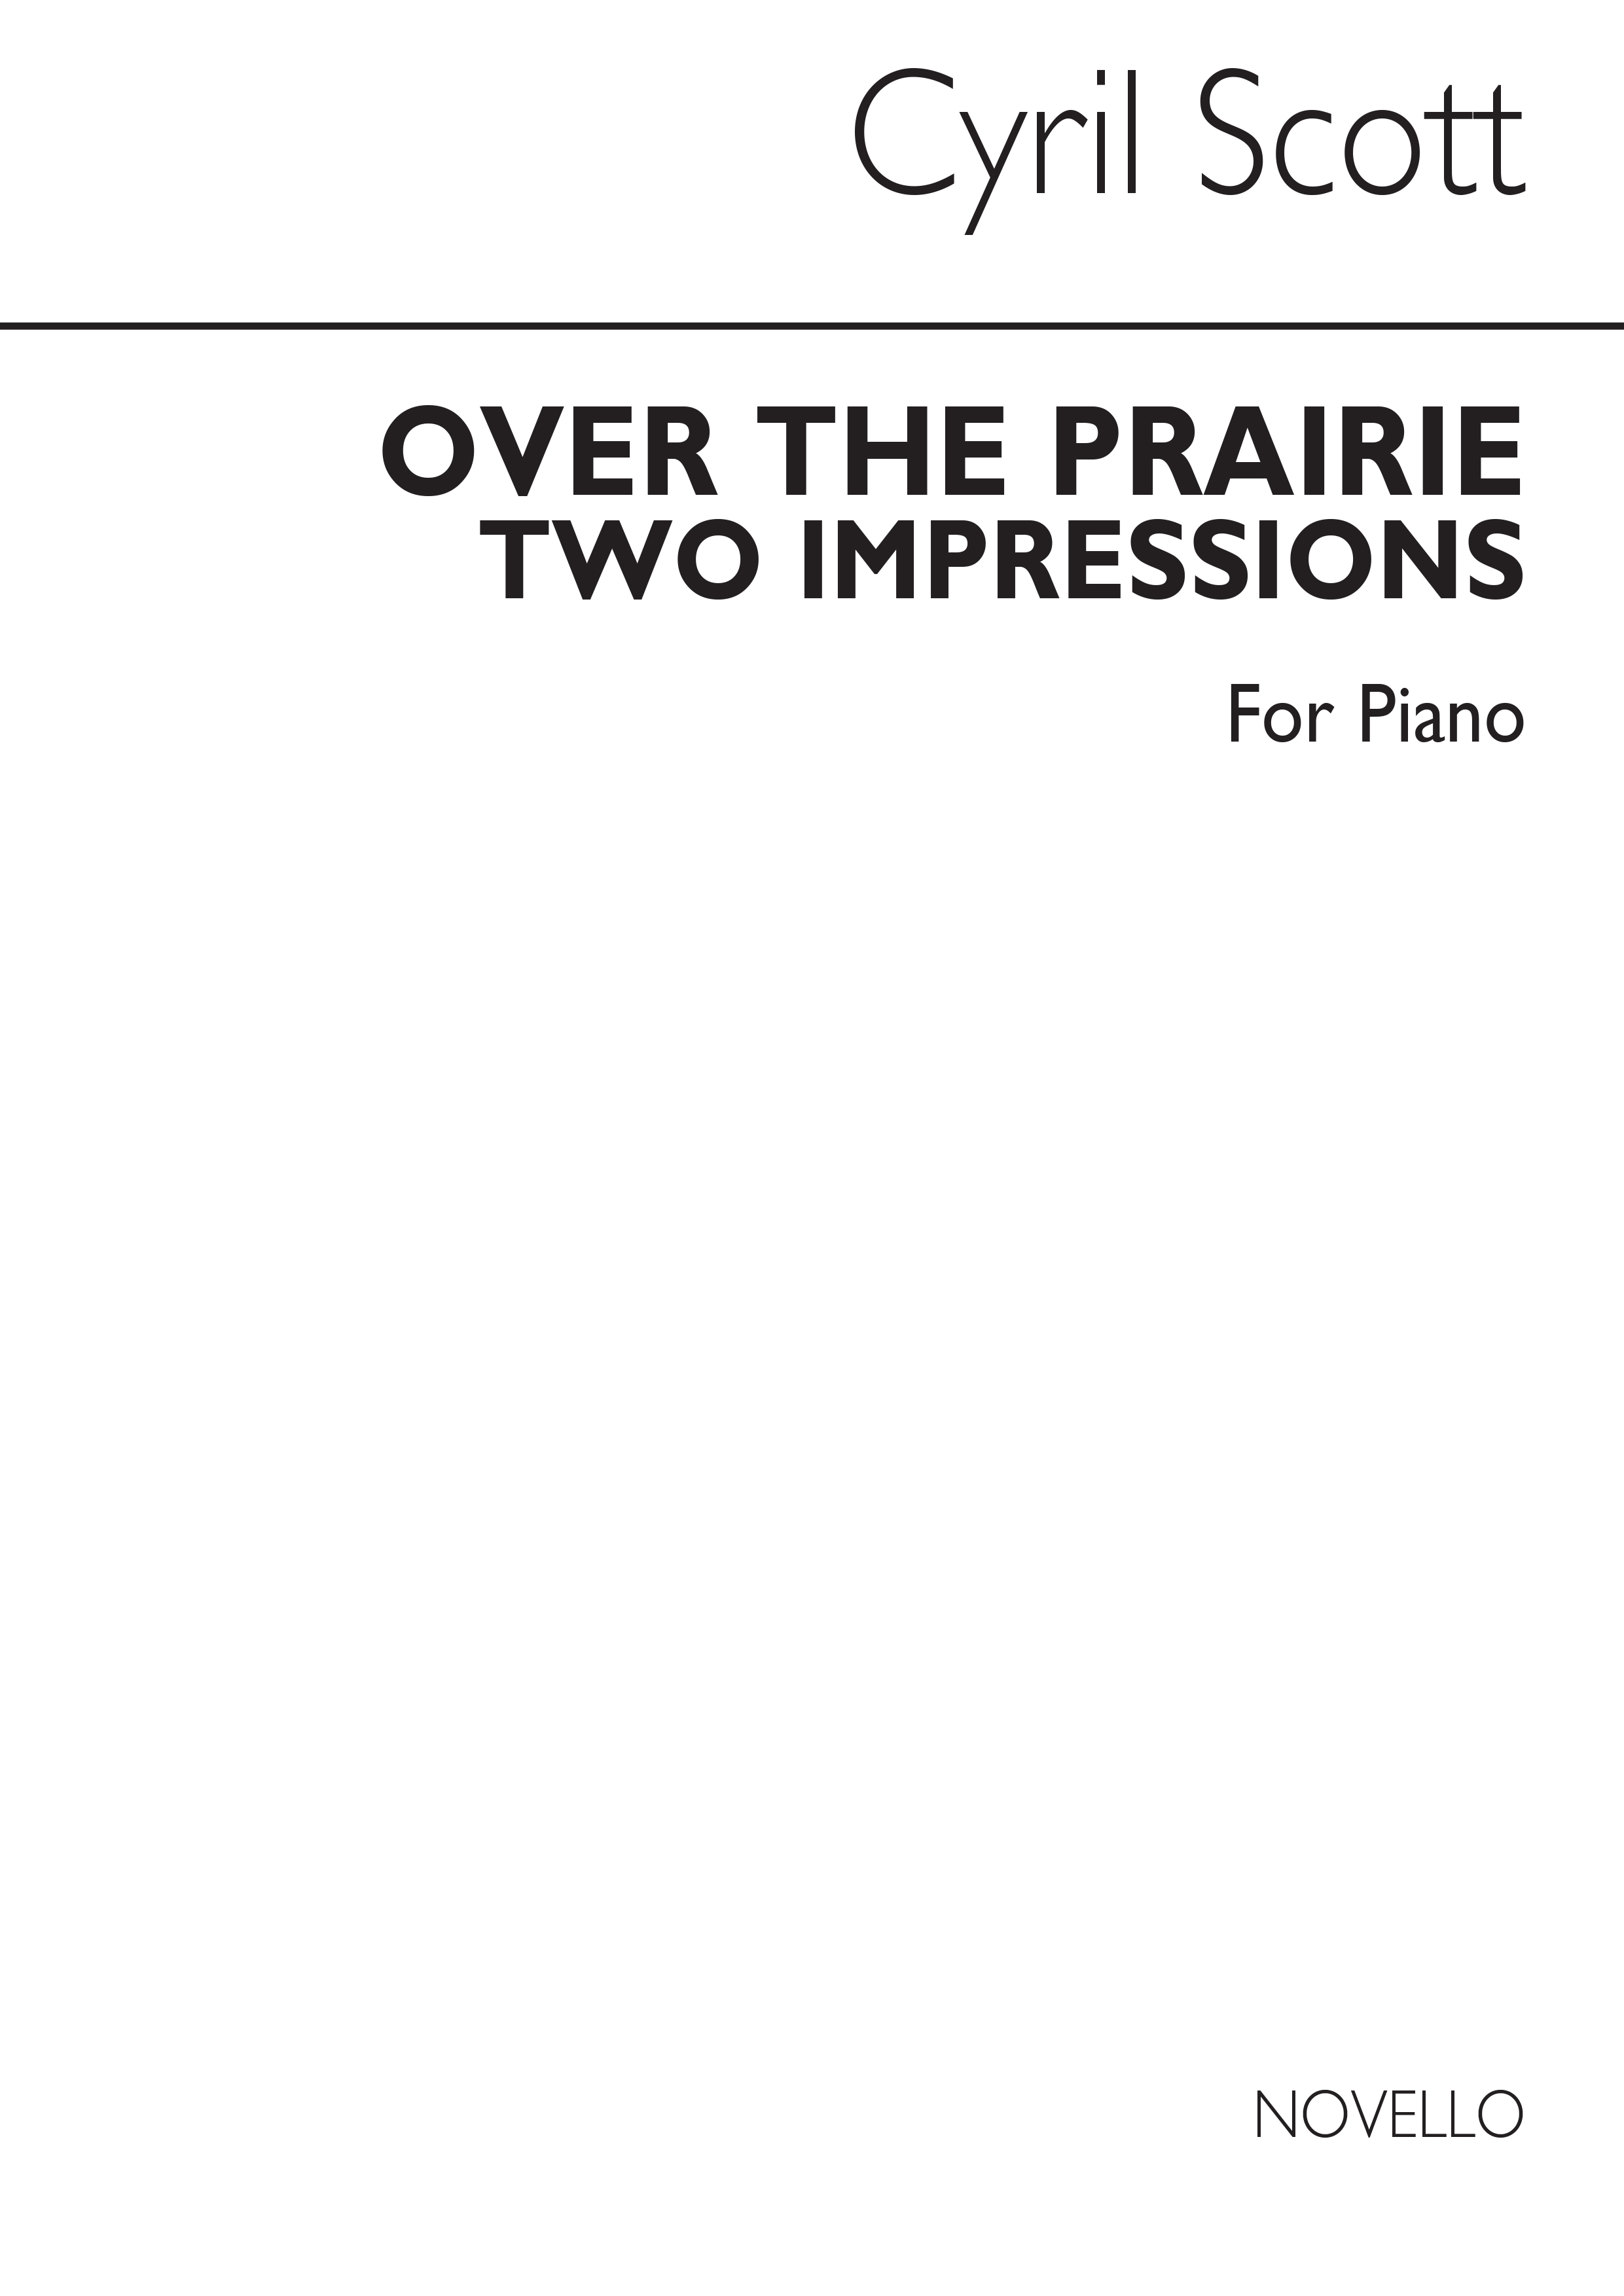 Cyril Scott: Over The Prairie (Two Impressions)